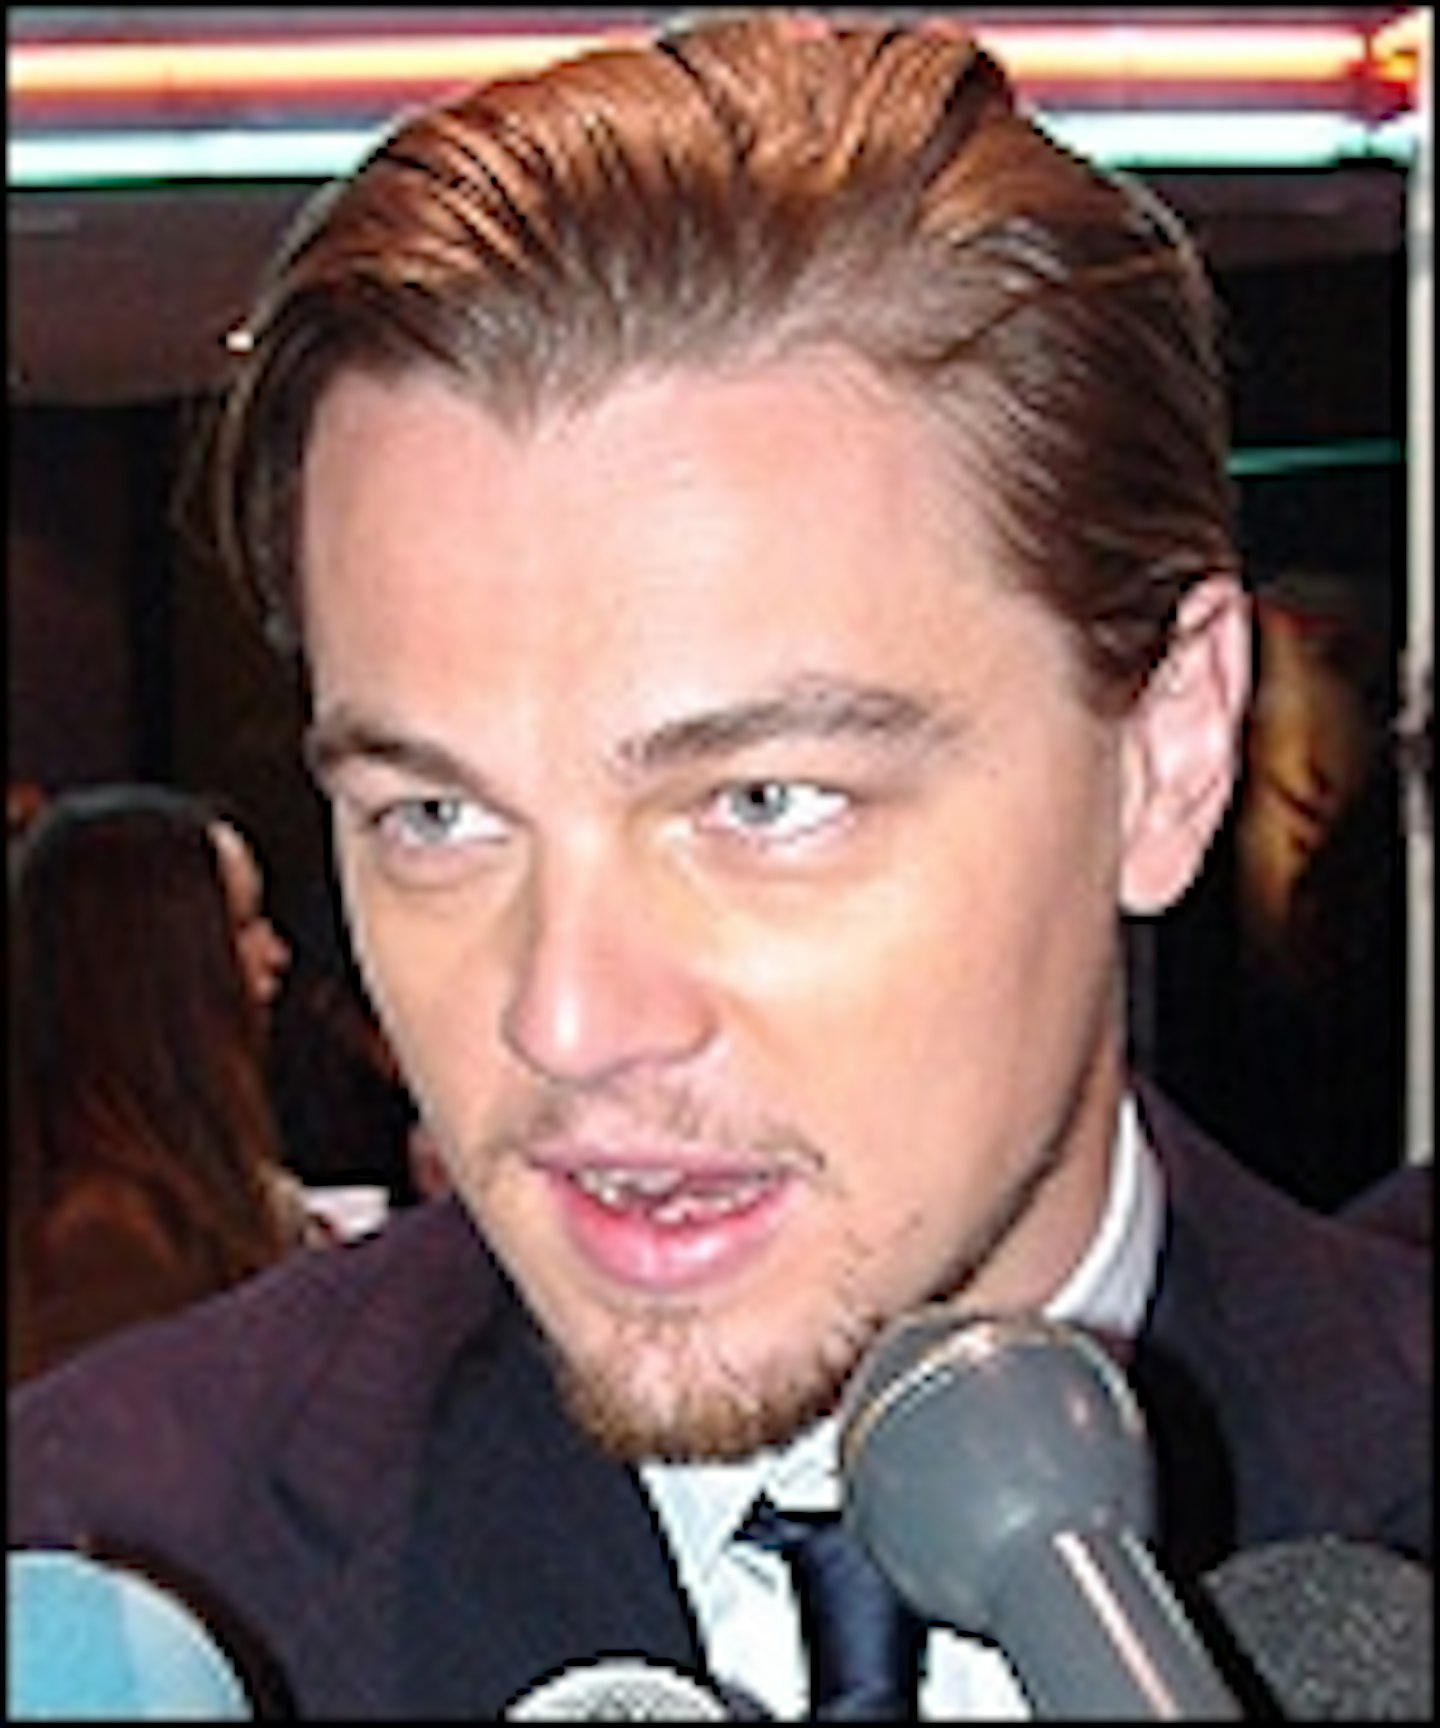 Is Leo The Infiltrator?